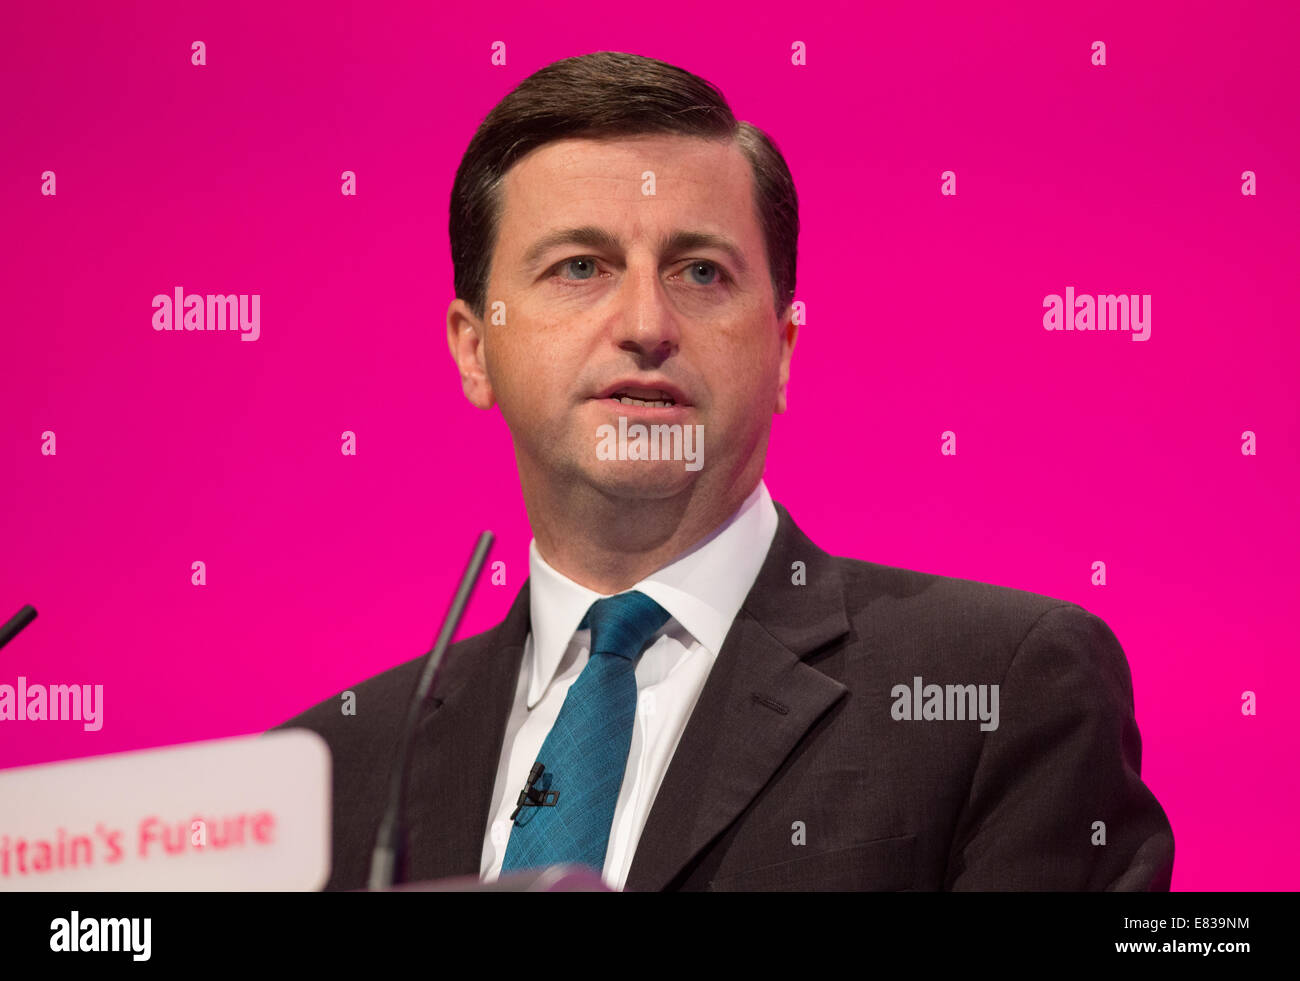 Douglas Alexander-Shadow Foreign secretary and MP for Paisley and Renfrewshire Stock Photo